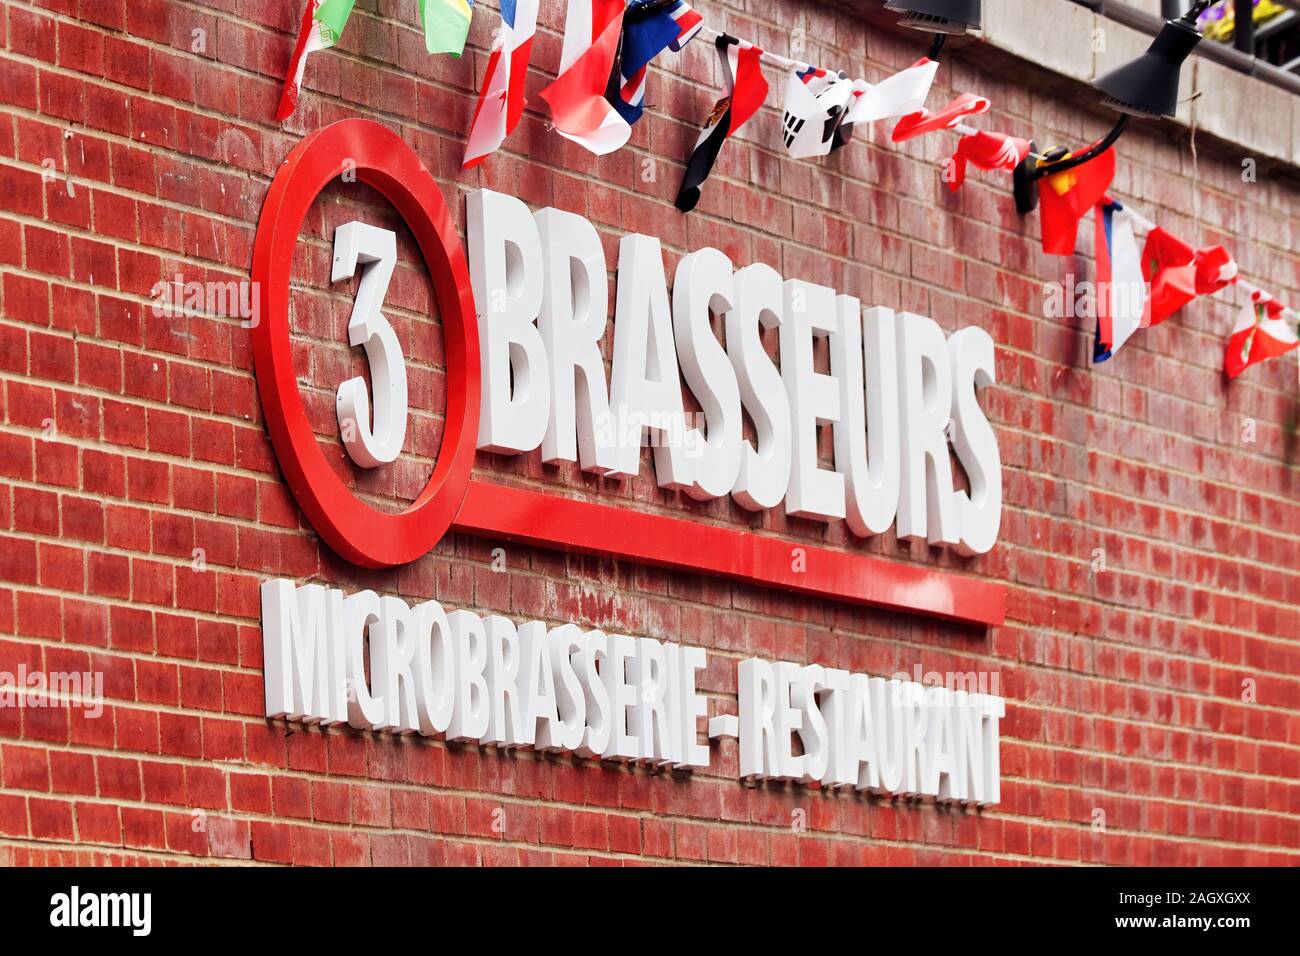 The restaurant sign of Les 3 Brasseurs (the three brewers), a French catering company specialized in microbrewery in Montreal, Canada Stock Photo